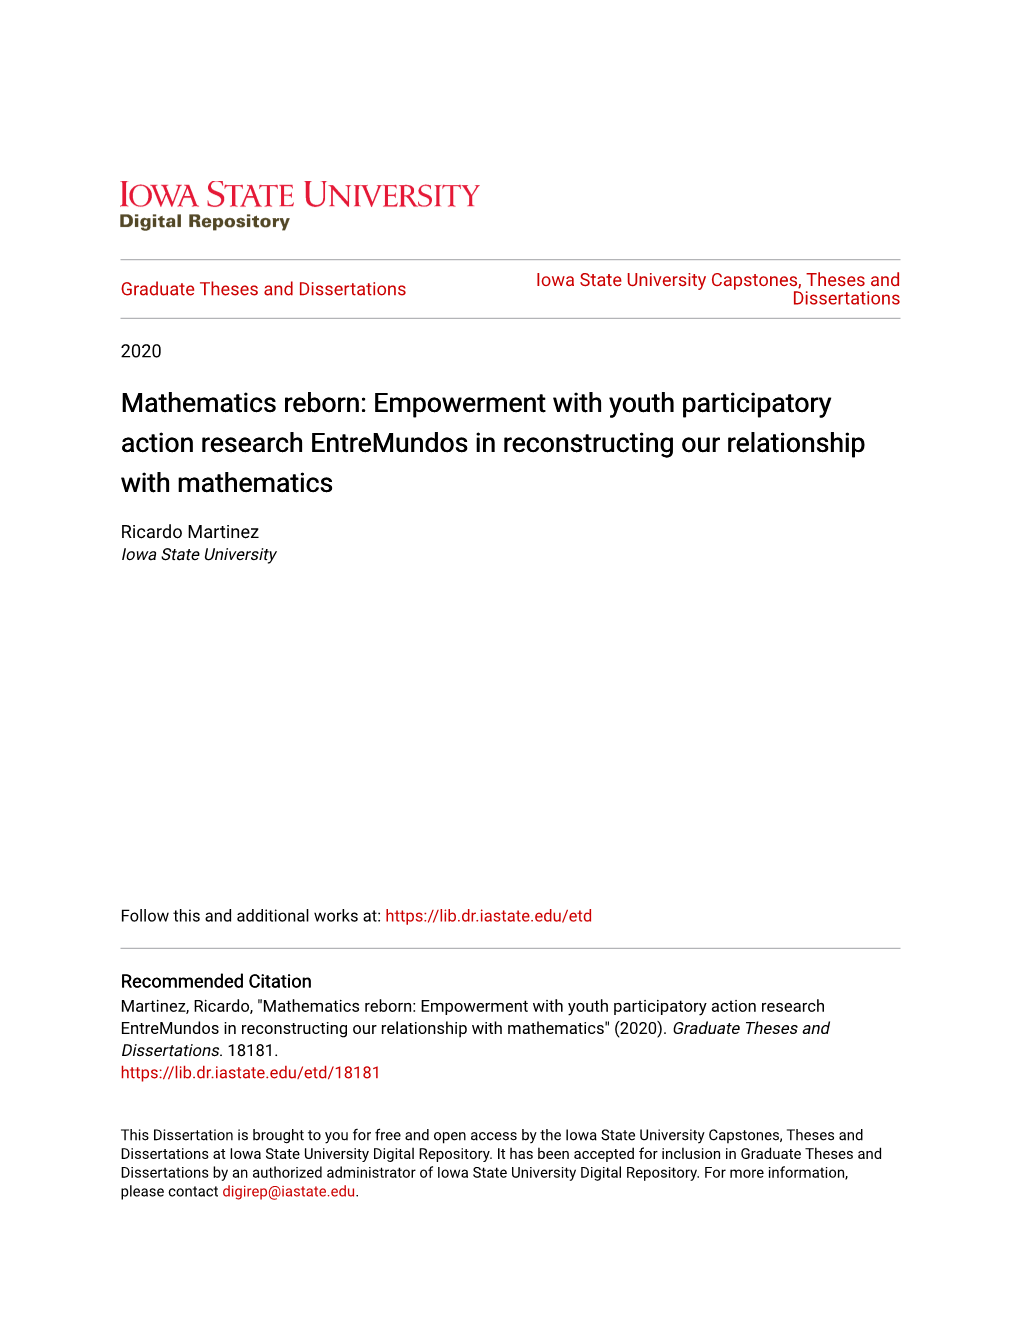 Mathematics Reborn: Empowerment with Youth Participatory Action Research Entremundos in Reconstructing Our Relationship with Mathematics